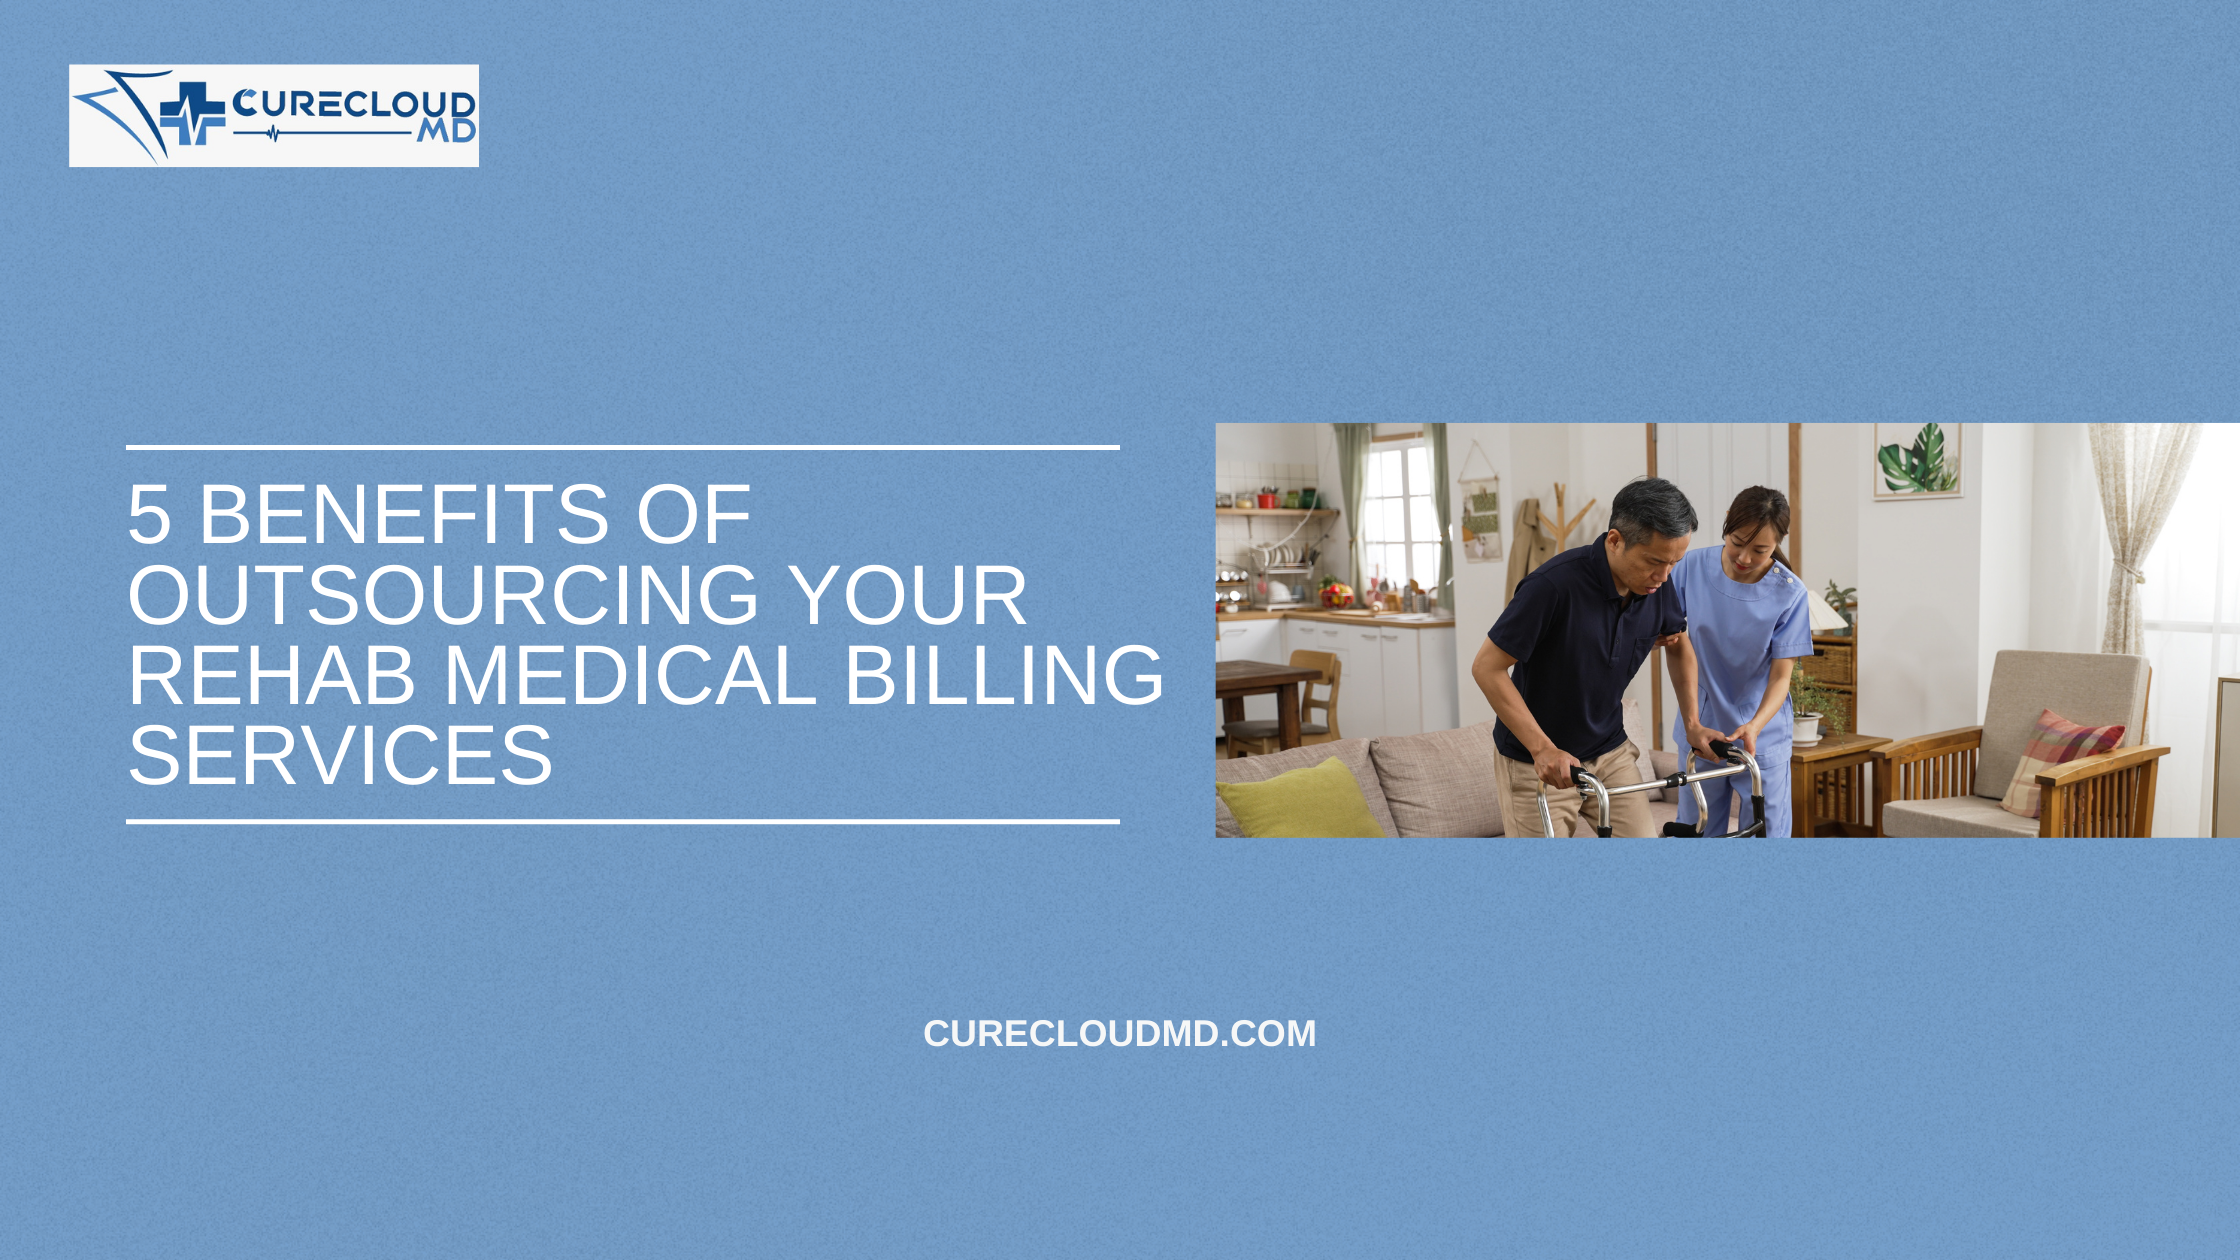 5 Benefits of Outsourcing Your Rehab Medical Billing Services